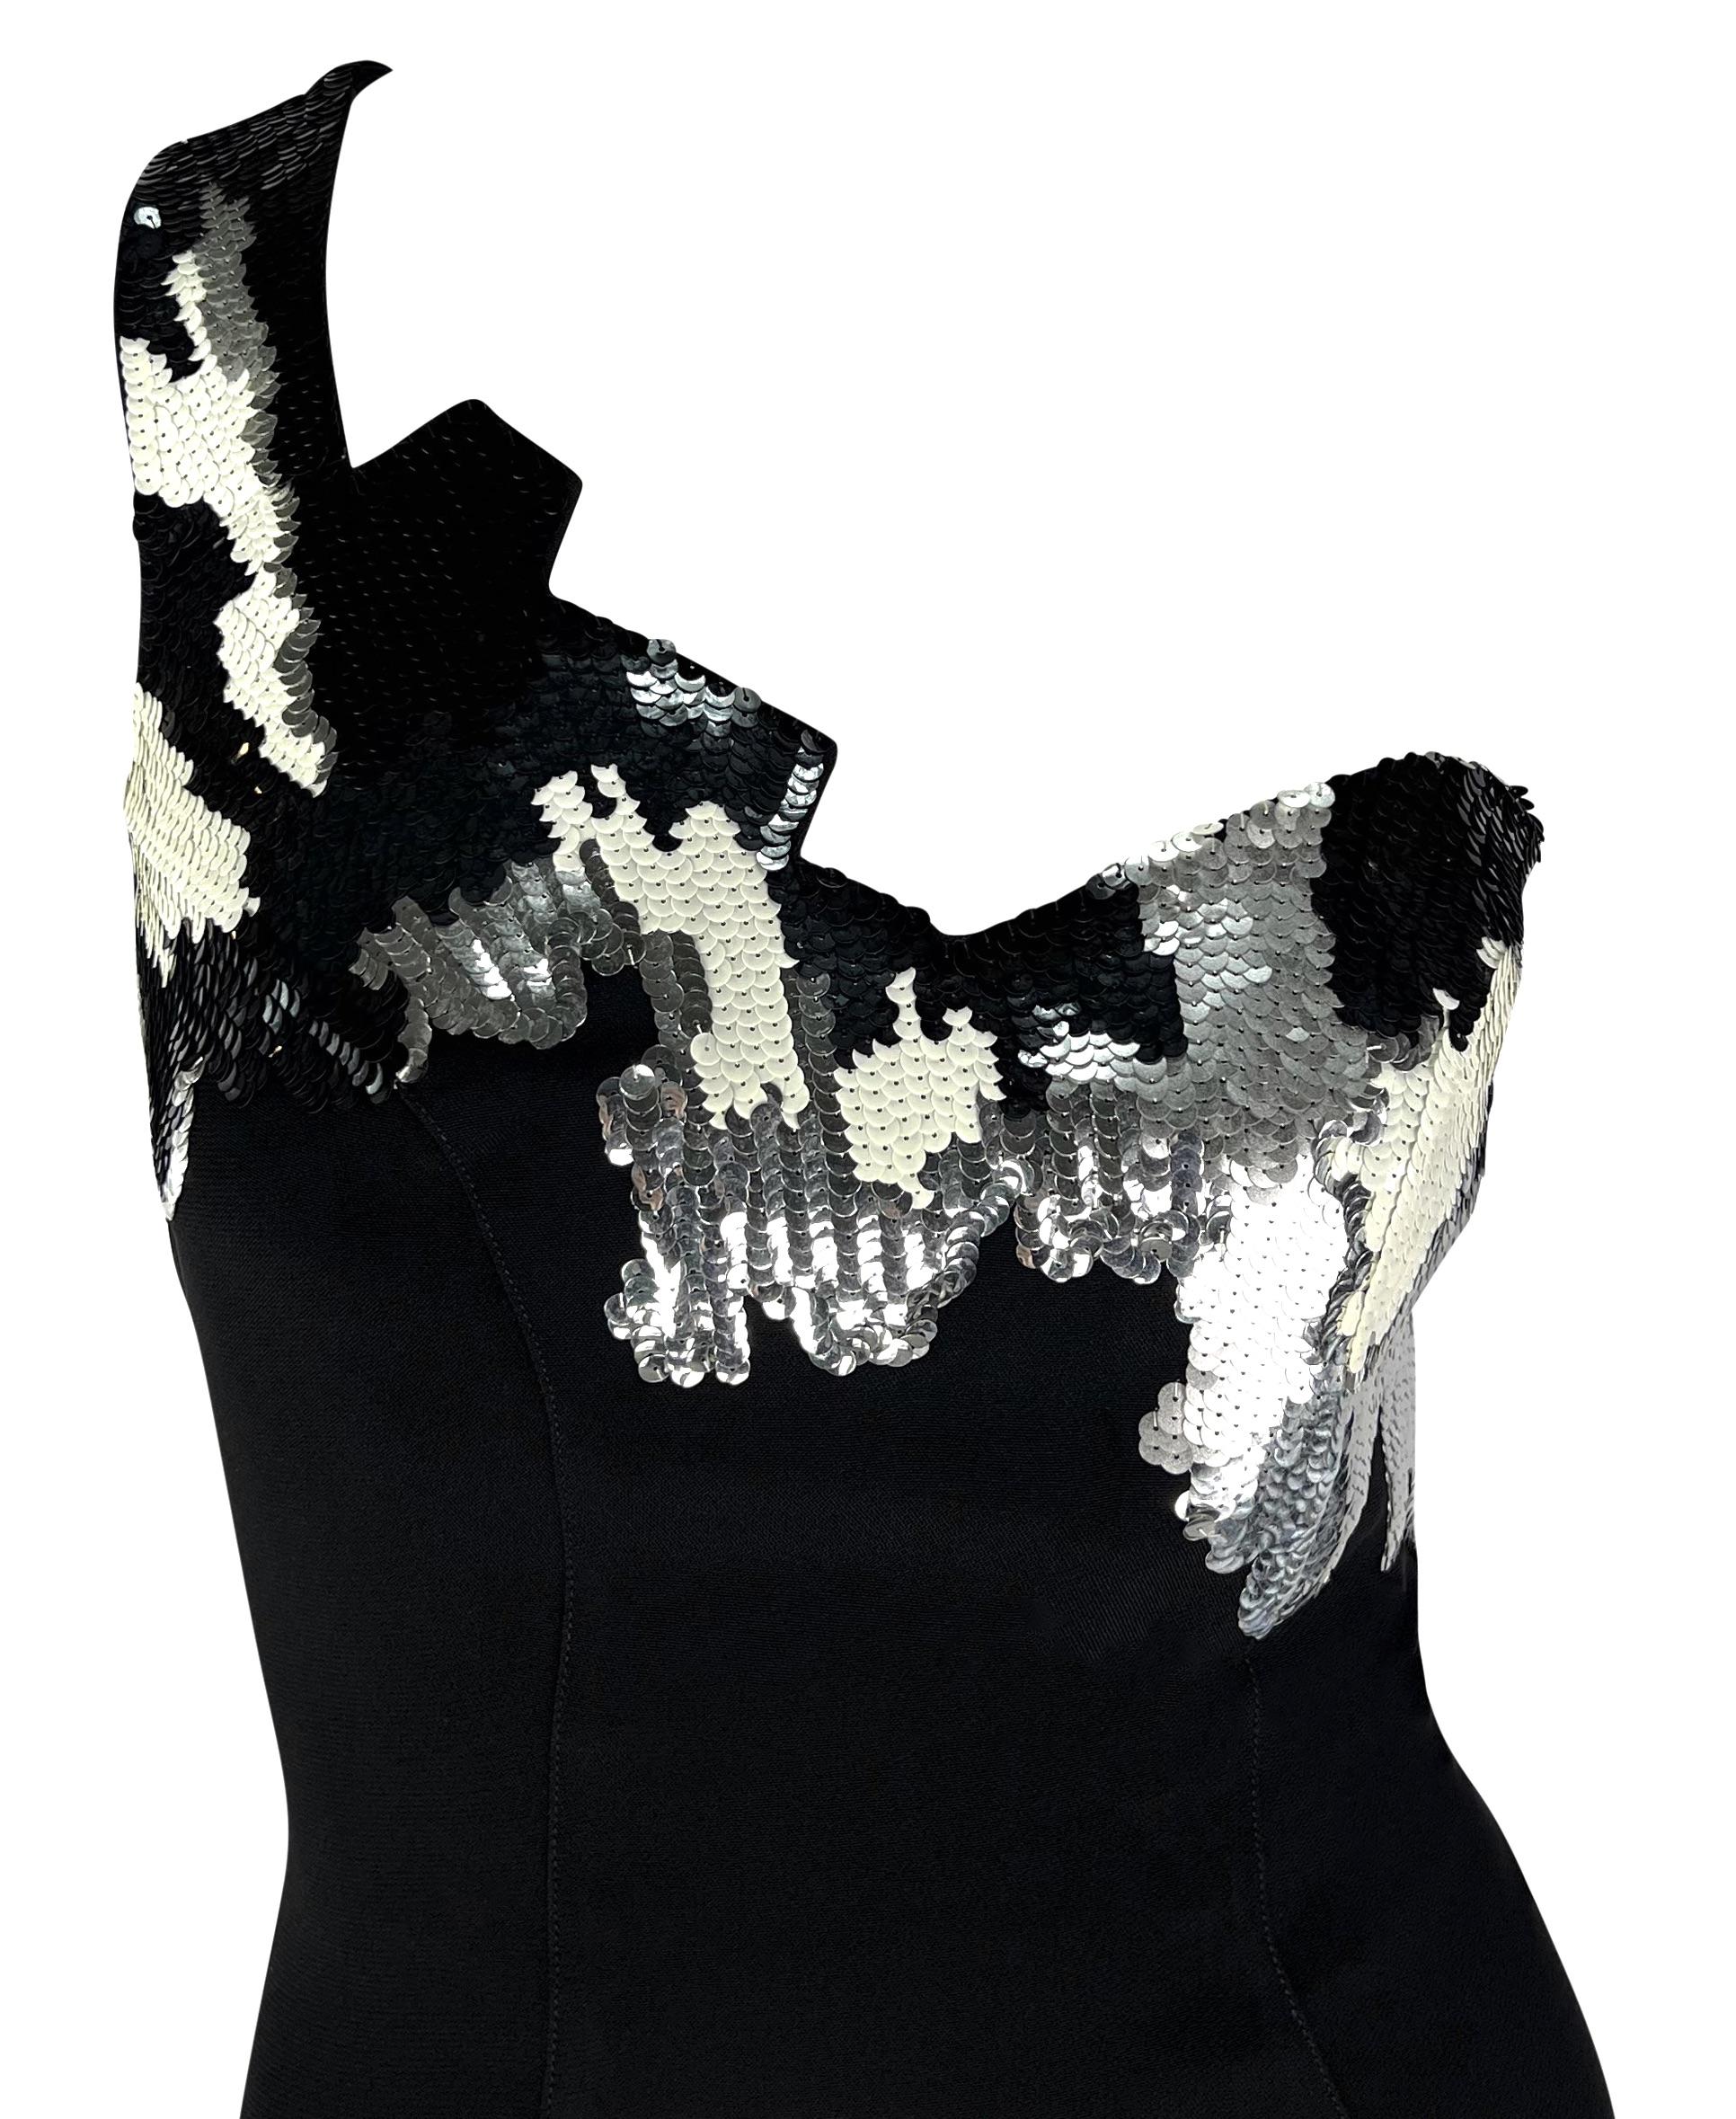 Manfred Mugler designed this stunning black Thierry Mugler mini dress for the Fall/Winter 1989 collection. This captivating dress features a single shoulder strap with an abstract angular cut bust accented with black, white, and silver sequins, with